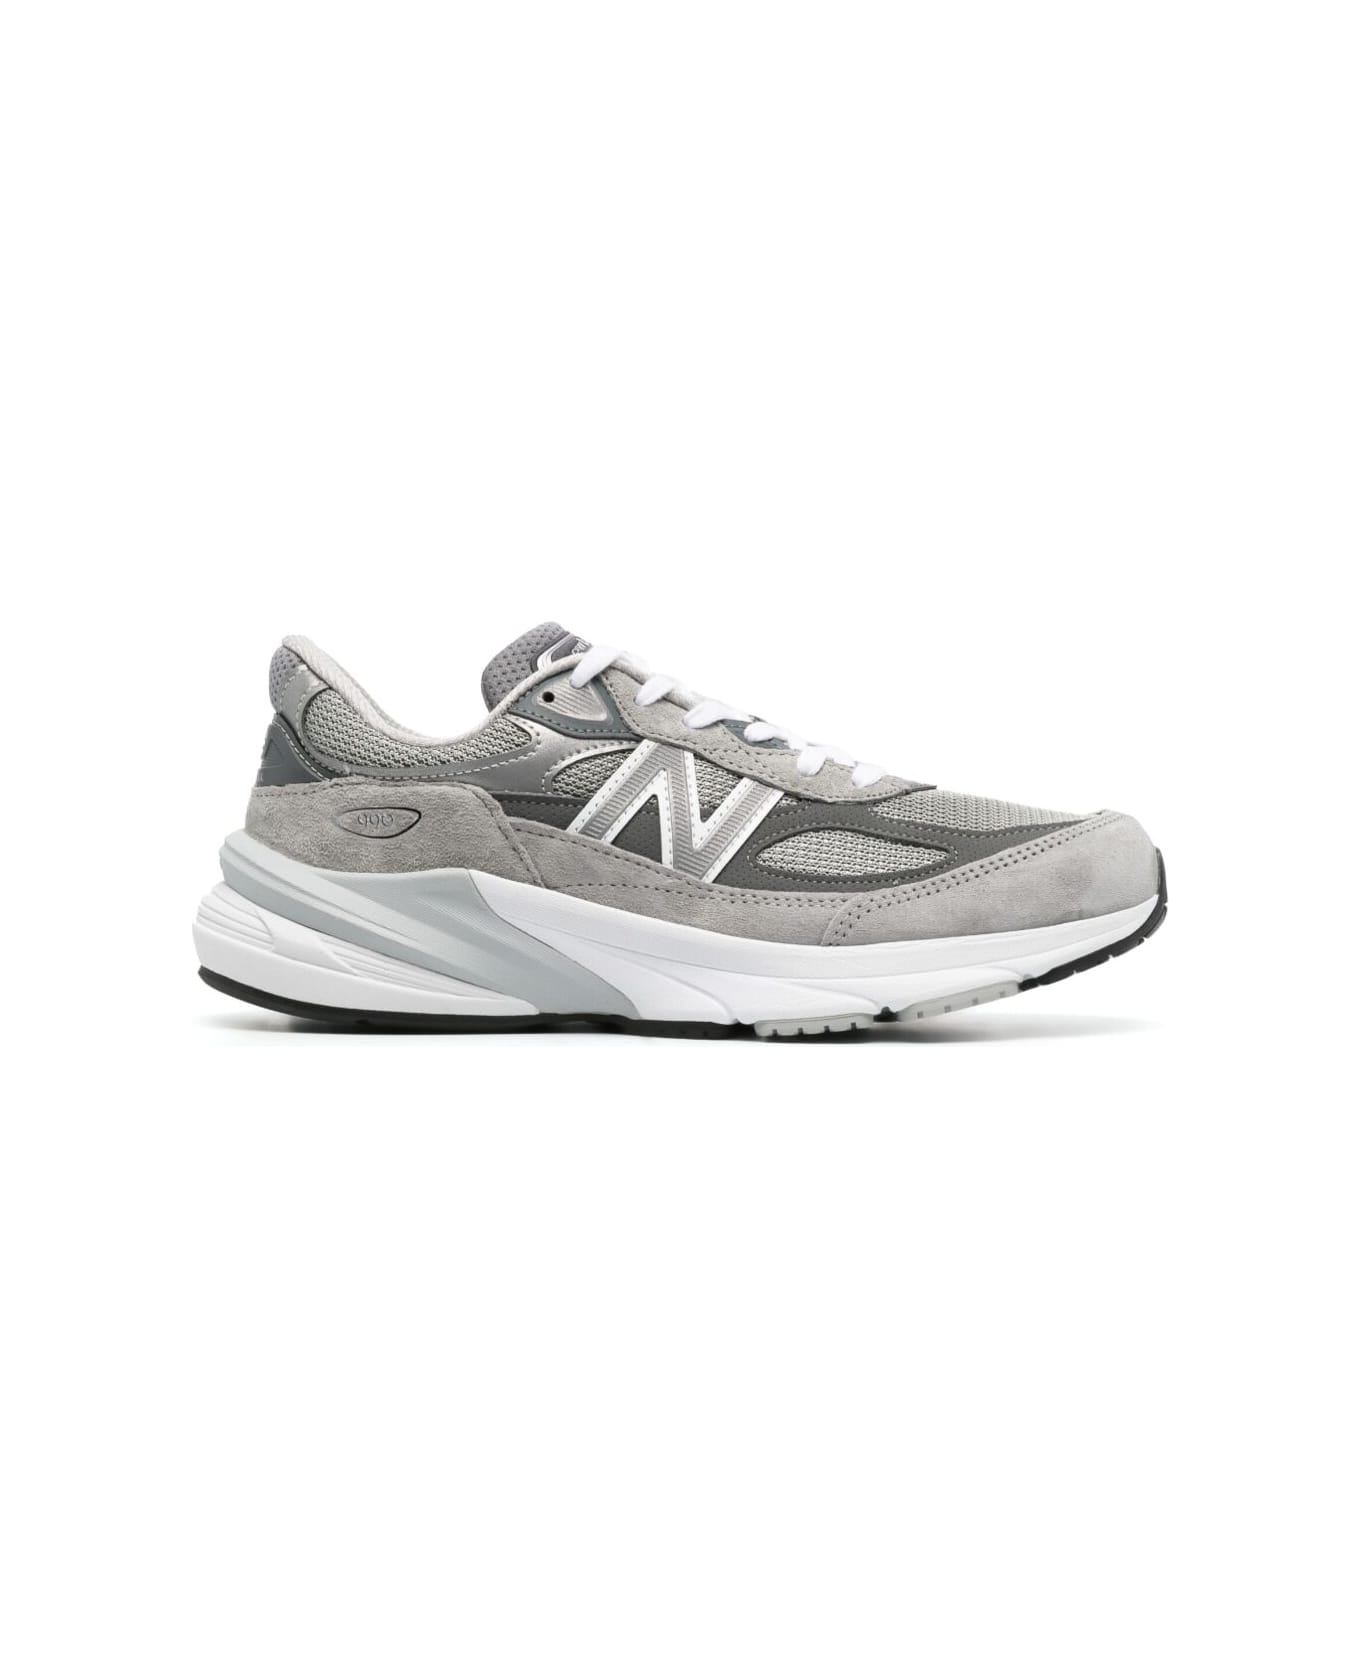 New Balance '990 V6' Grey Low Top Sneakers With Logo Details In Tech Materials Woman - GREY